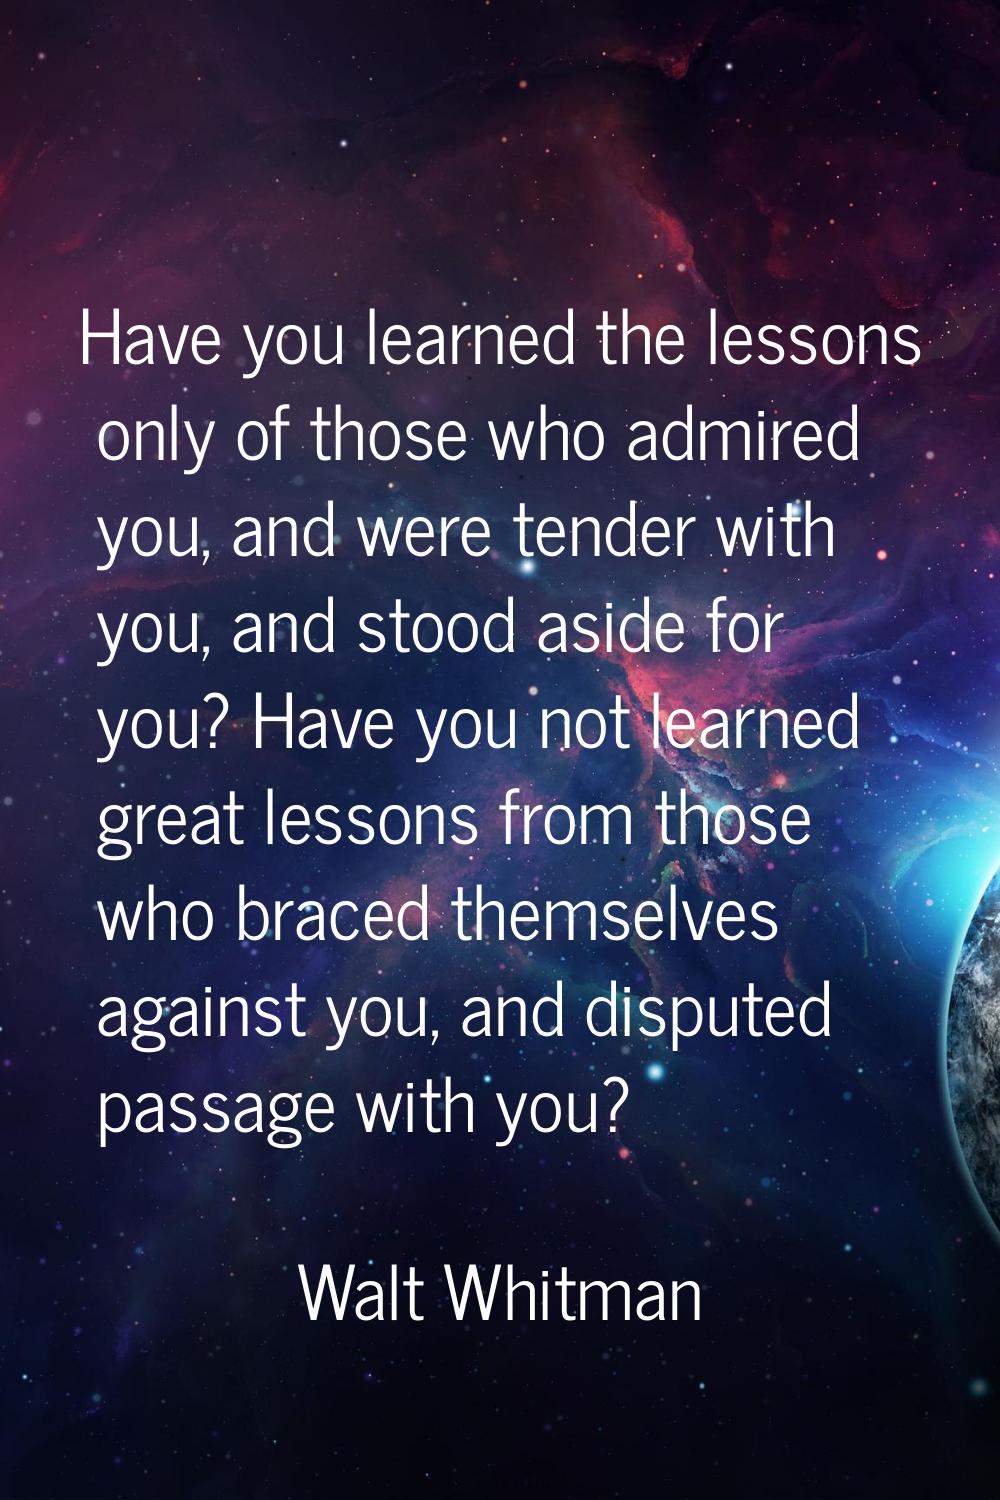 Have you learned the lessons only of those who admired you, and were tender with you, and stood asi